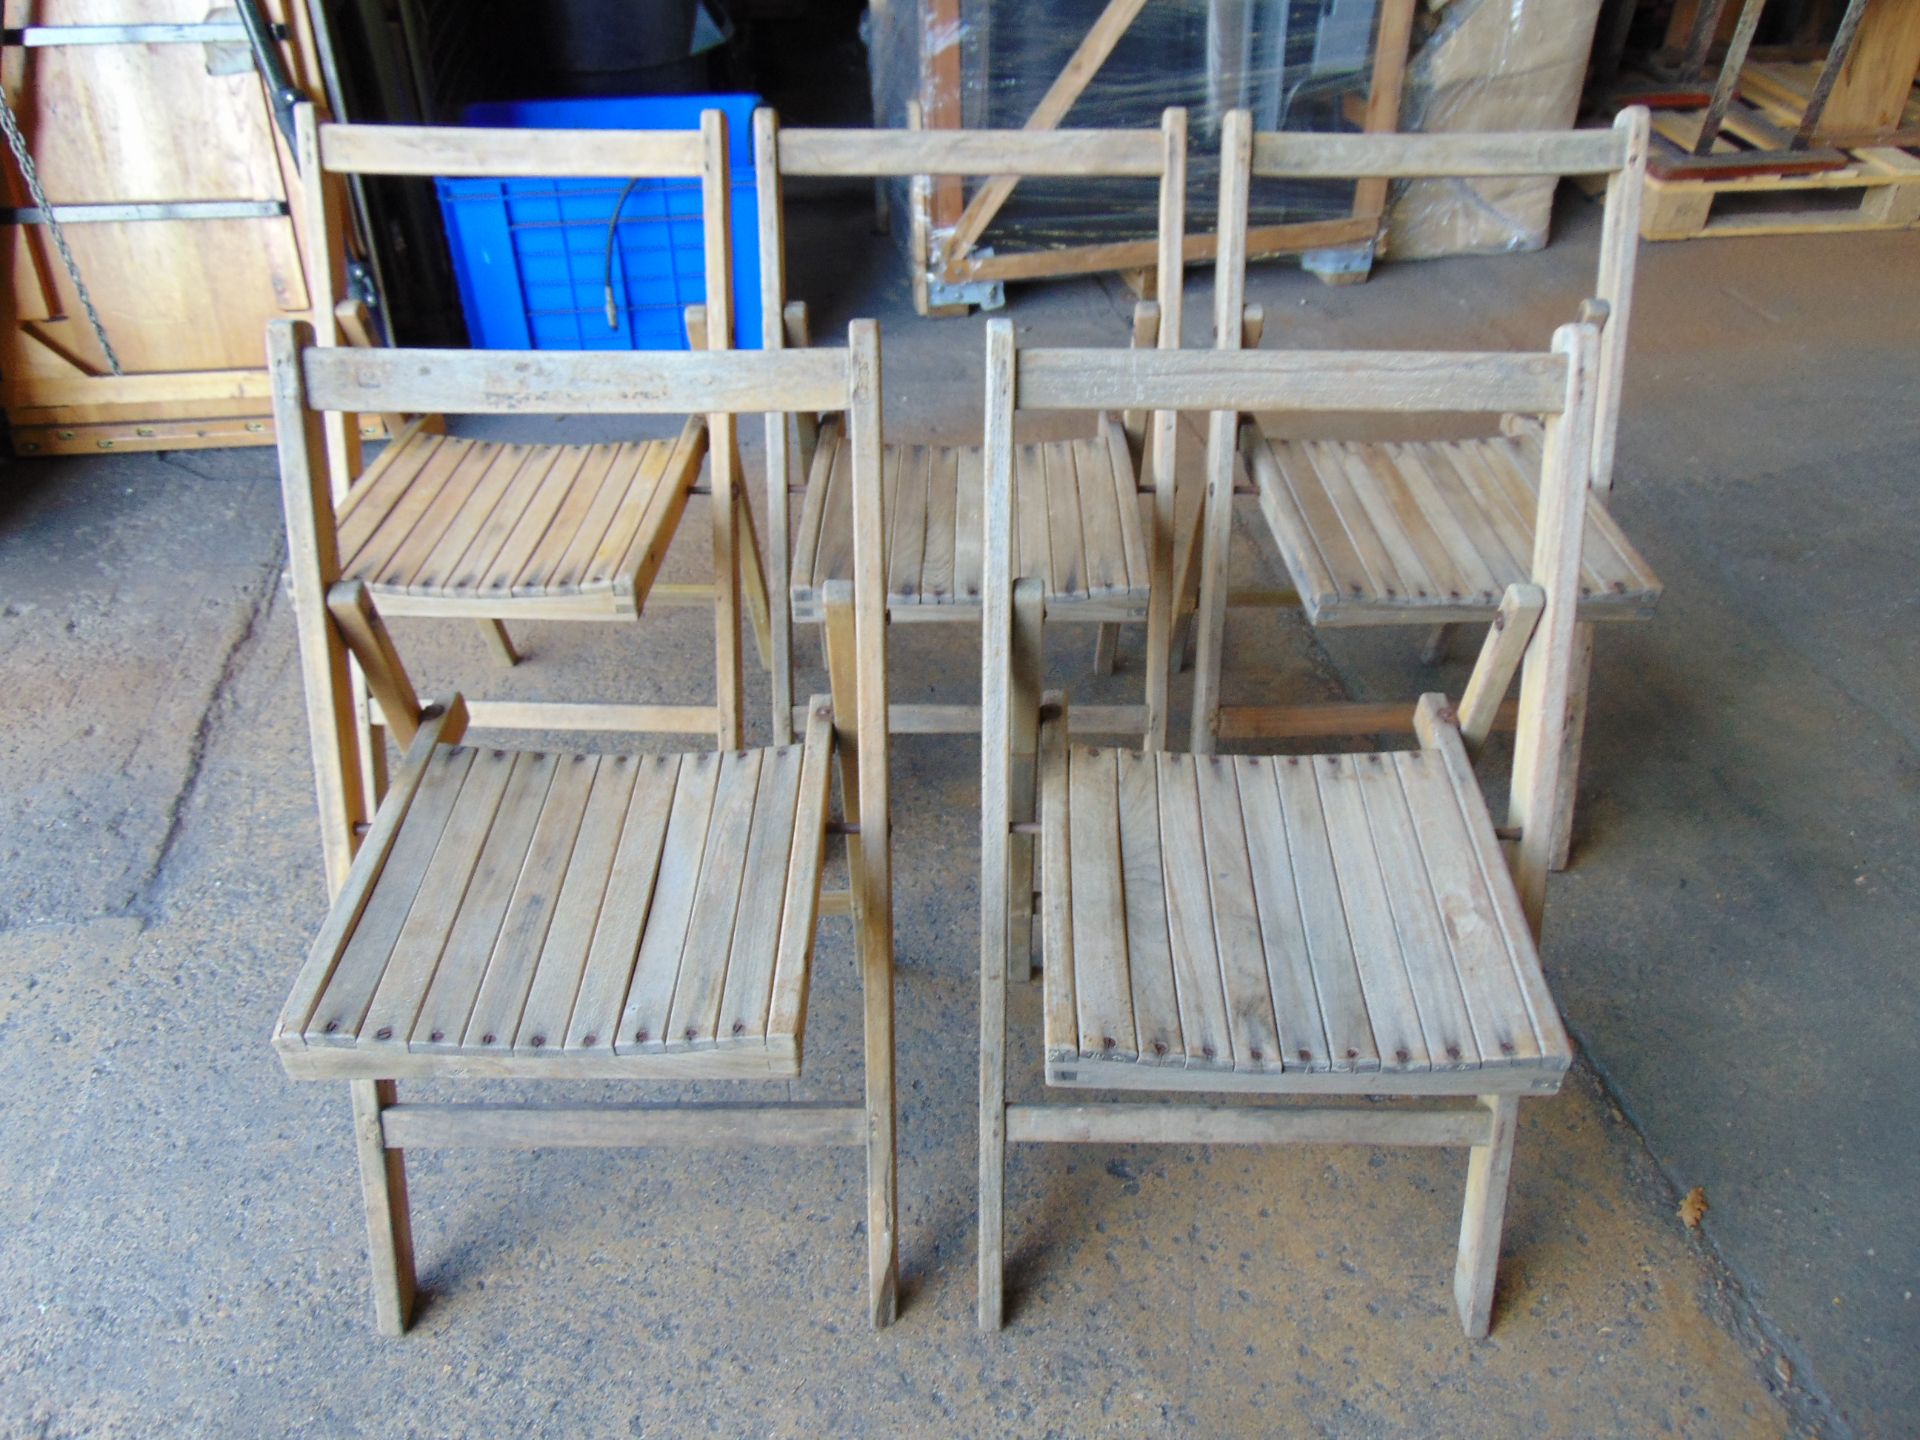 5 x British Army Wooden Folding Camp Chairs - Image 2 of 5